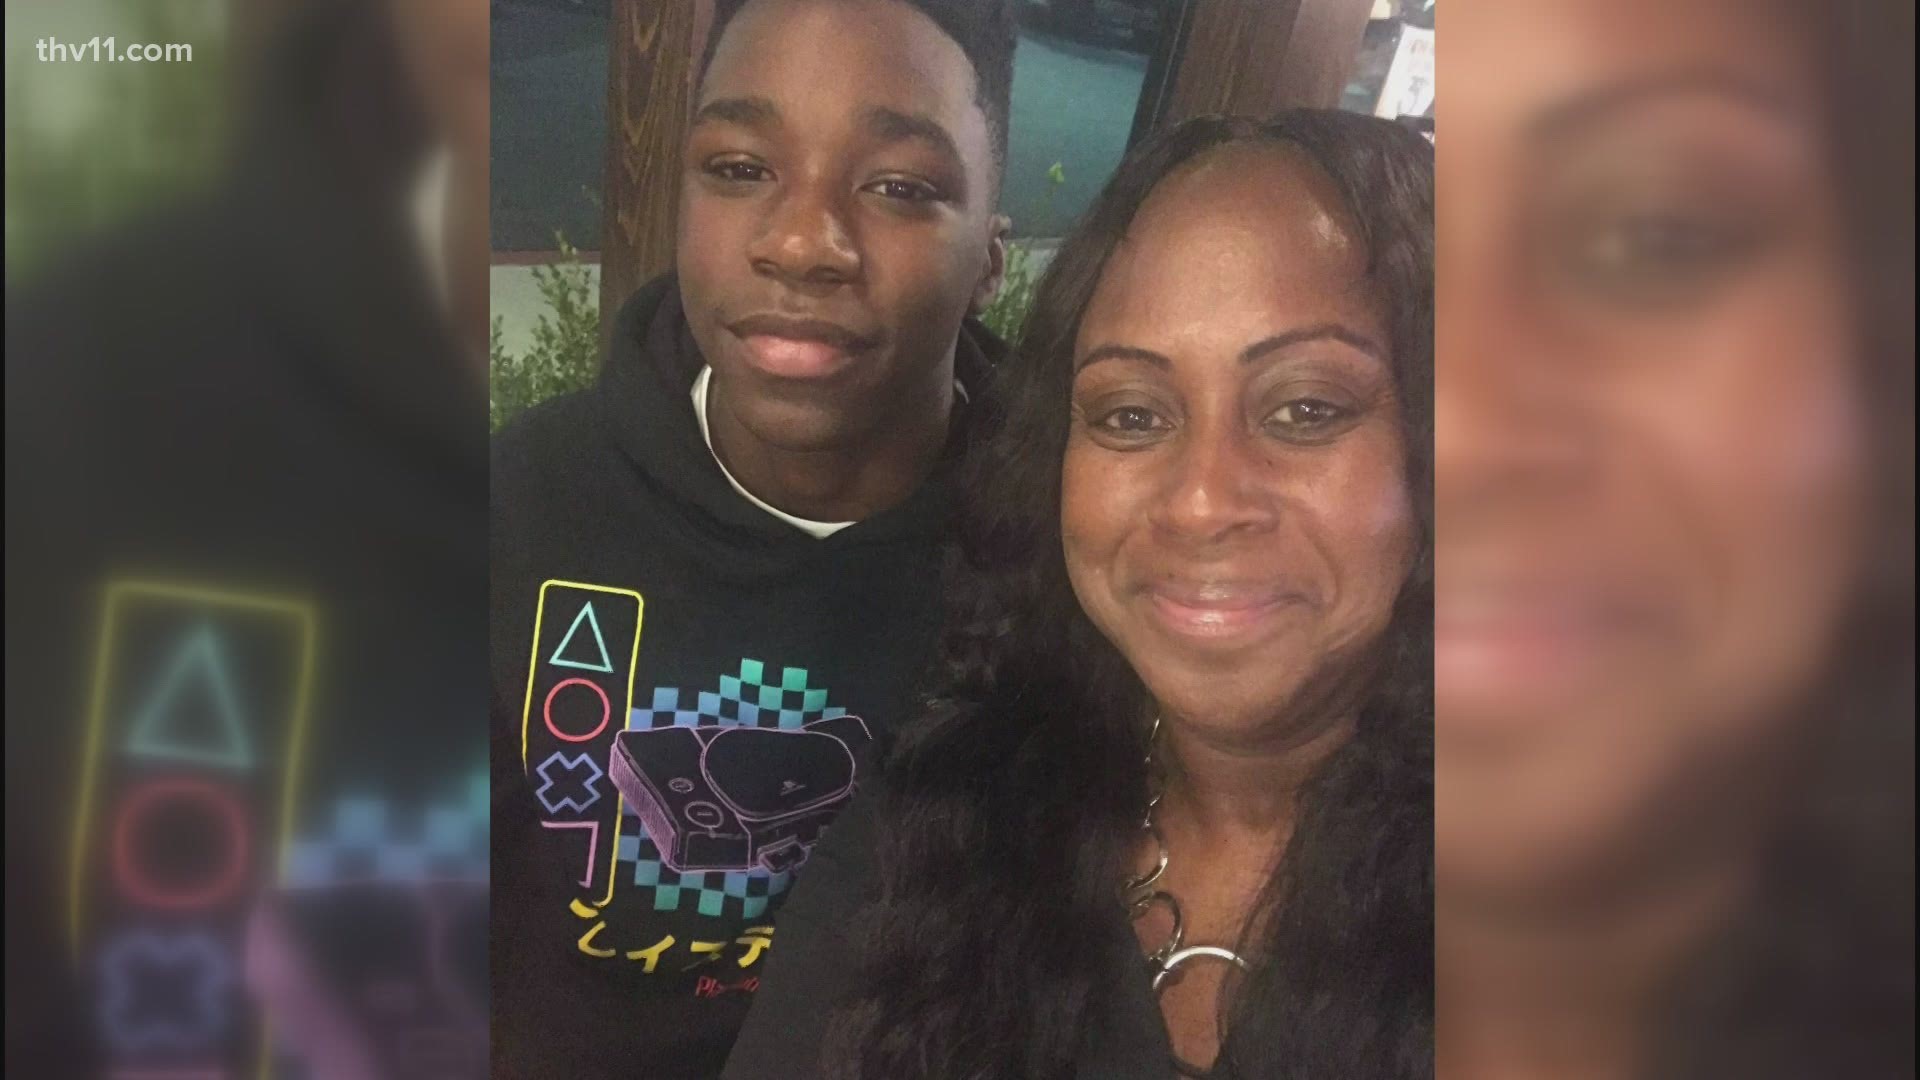 15-year-old Chase Dunn-Buffington and his mother were driving in a Chenal-area neighborhood in Little Rock when she said a White woman began following their car.